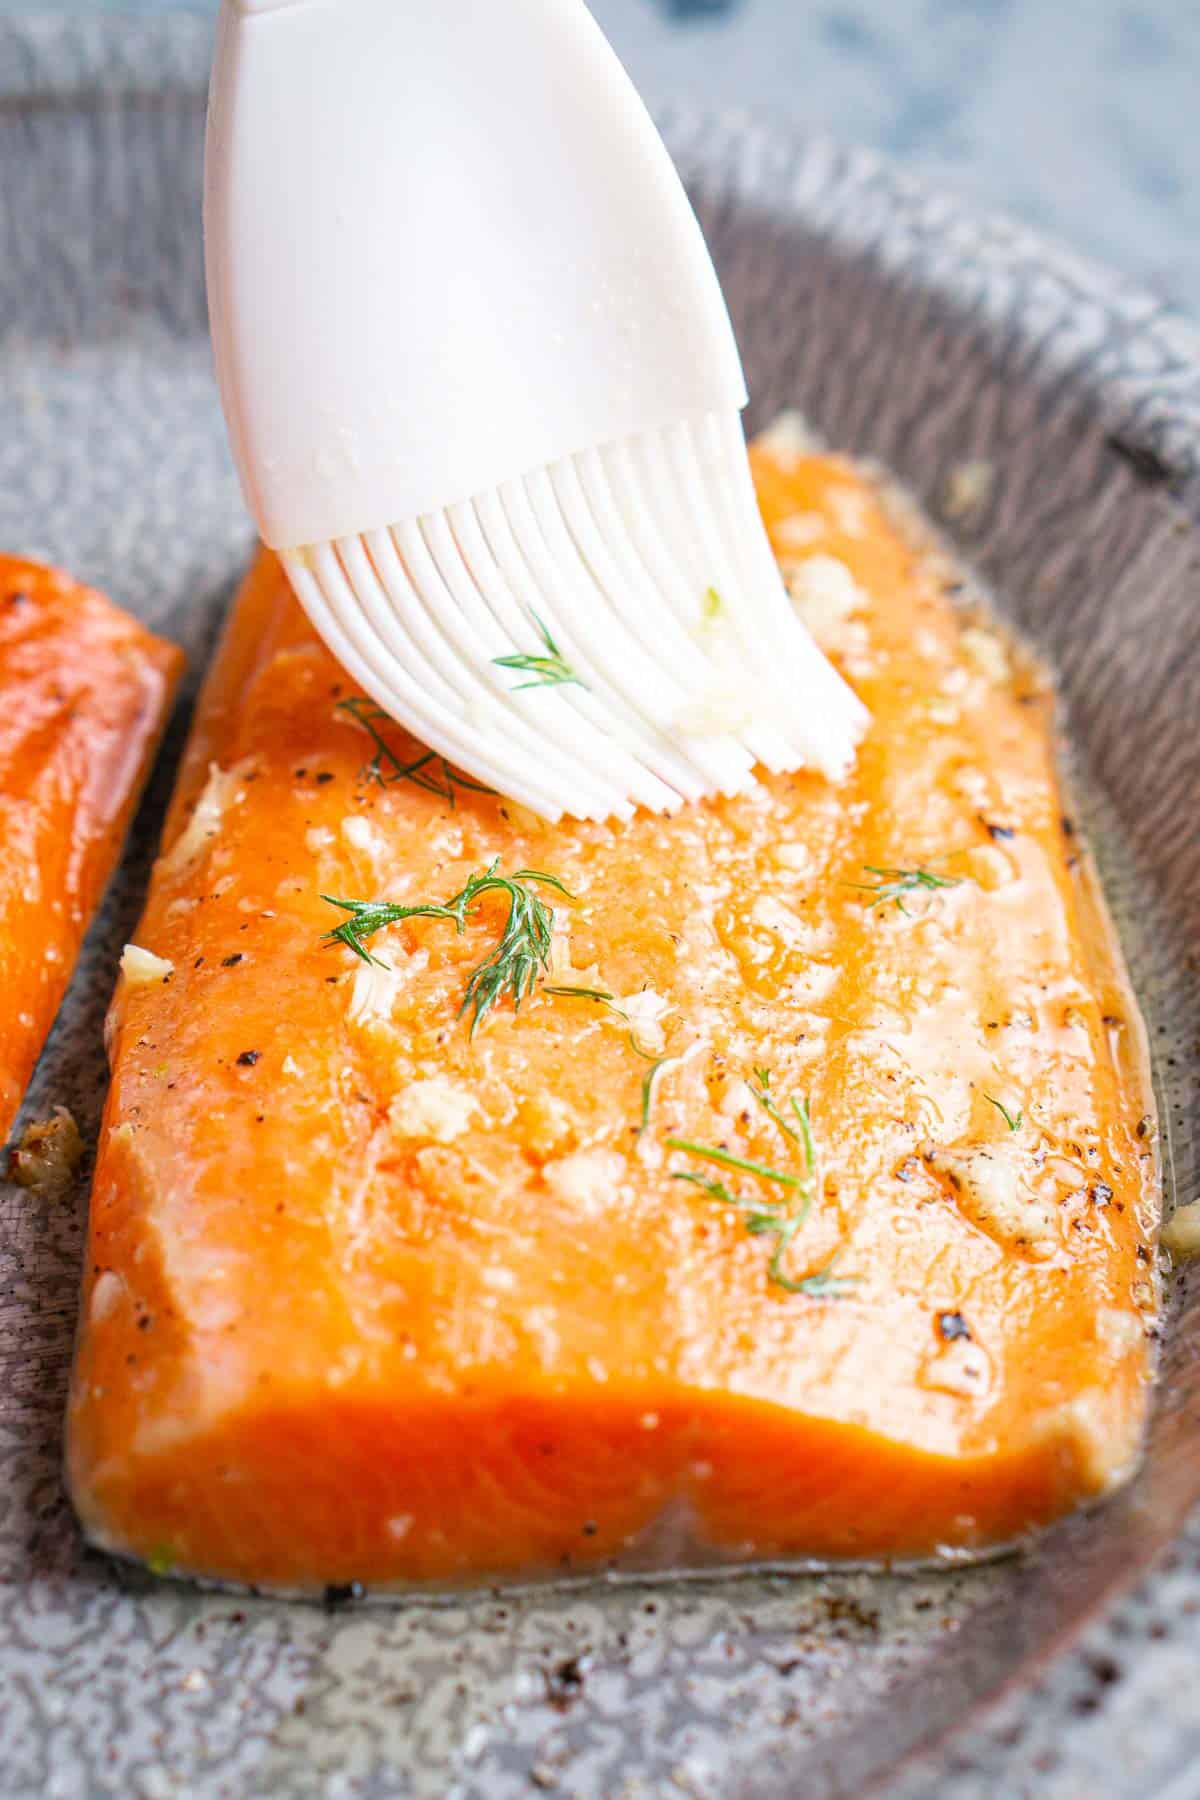 garlic butter is brushed over uncooked salmon fillets